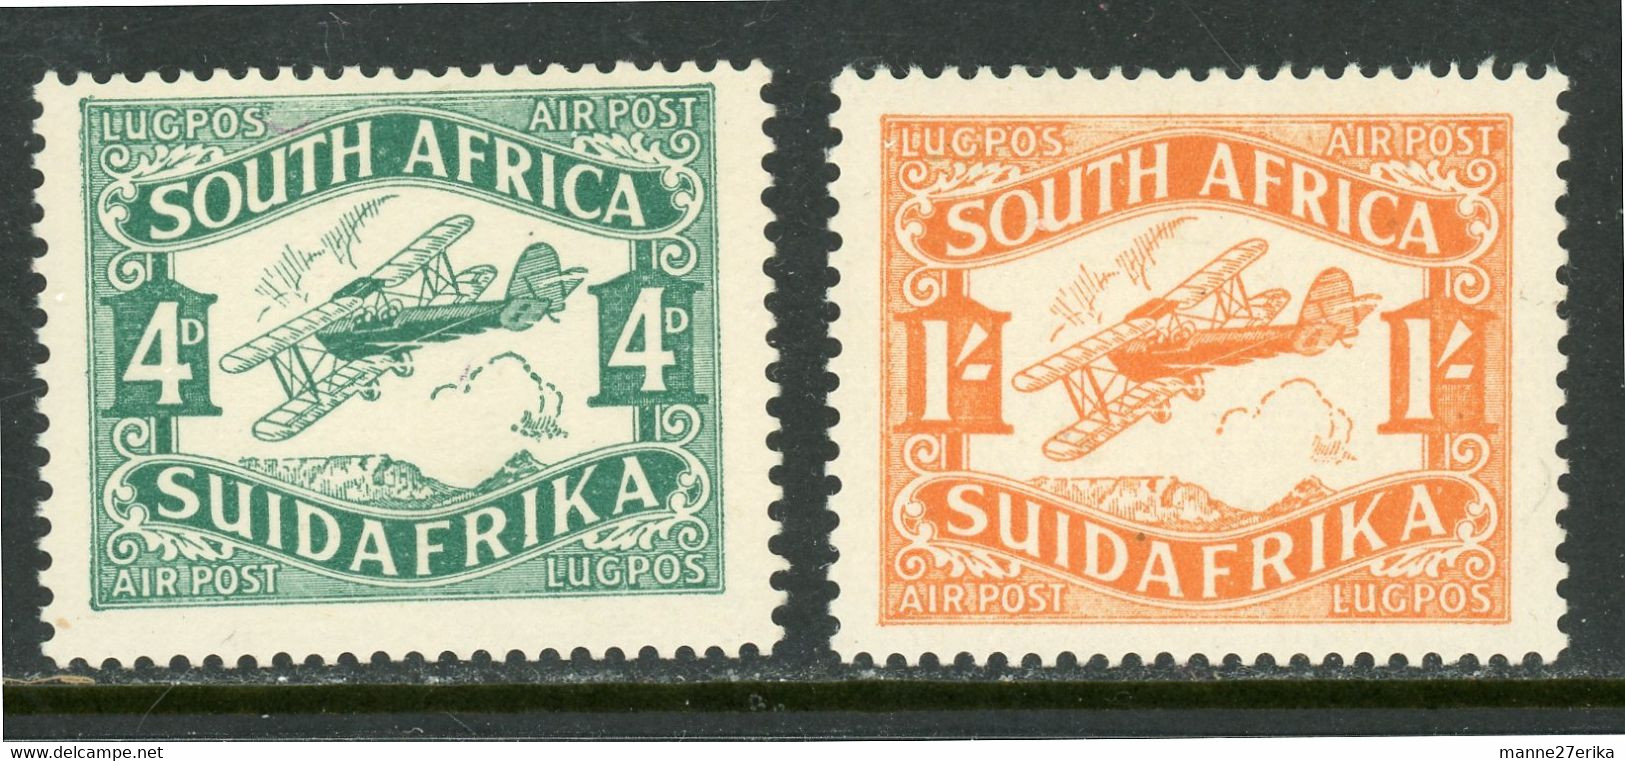 -South Africa-1929-"Airmails" MNH (**) - Luftpost